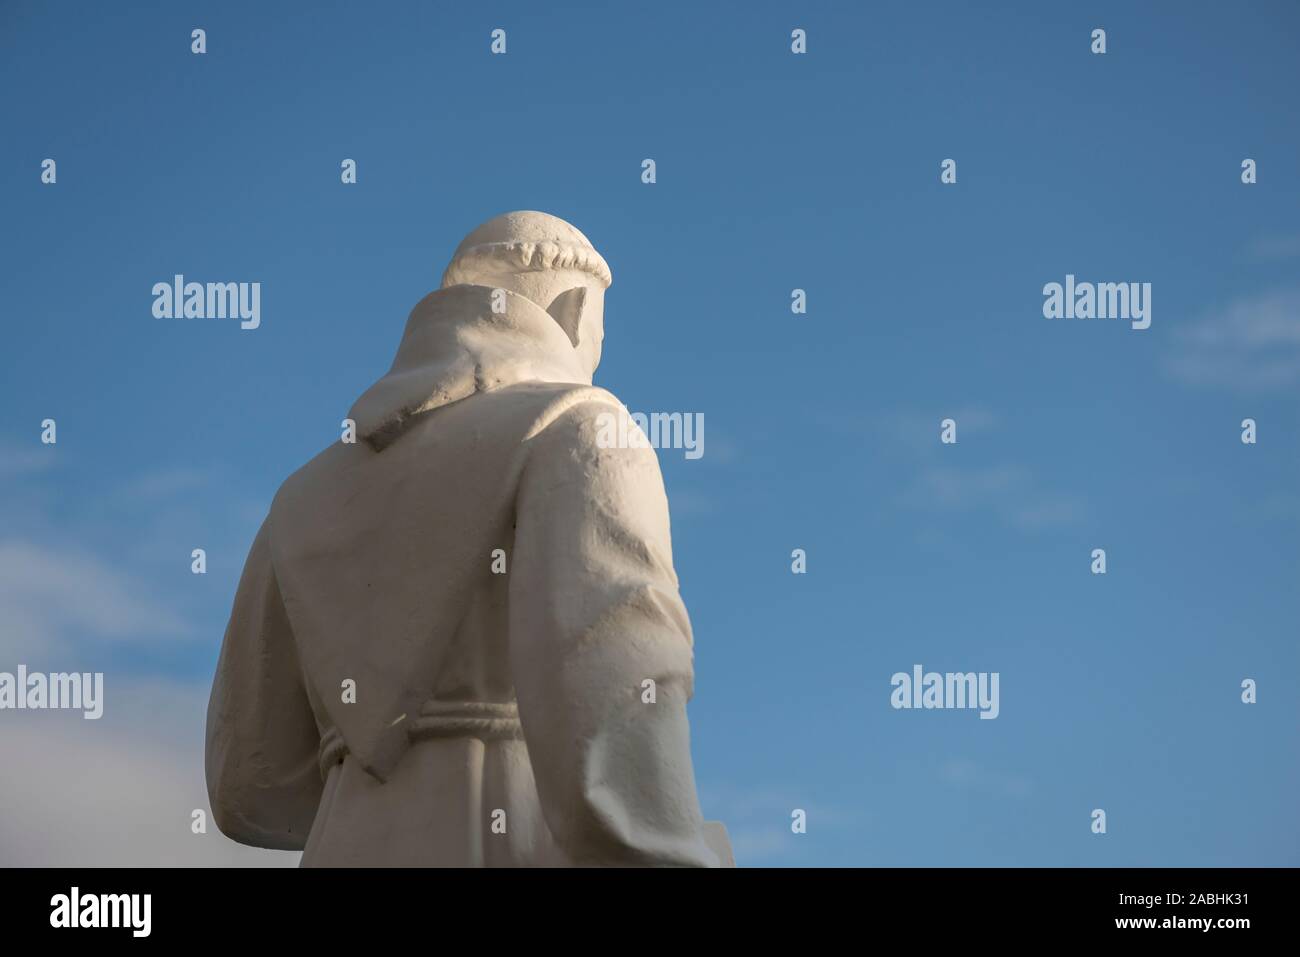 Religious figure statue of a friar monk back wearing Franciscan habit robe Stock Photo